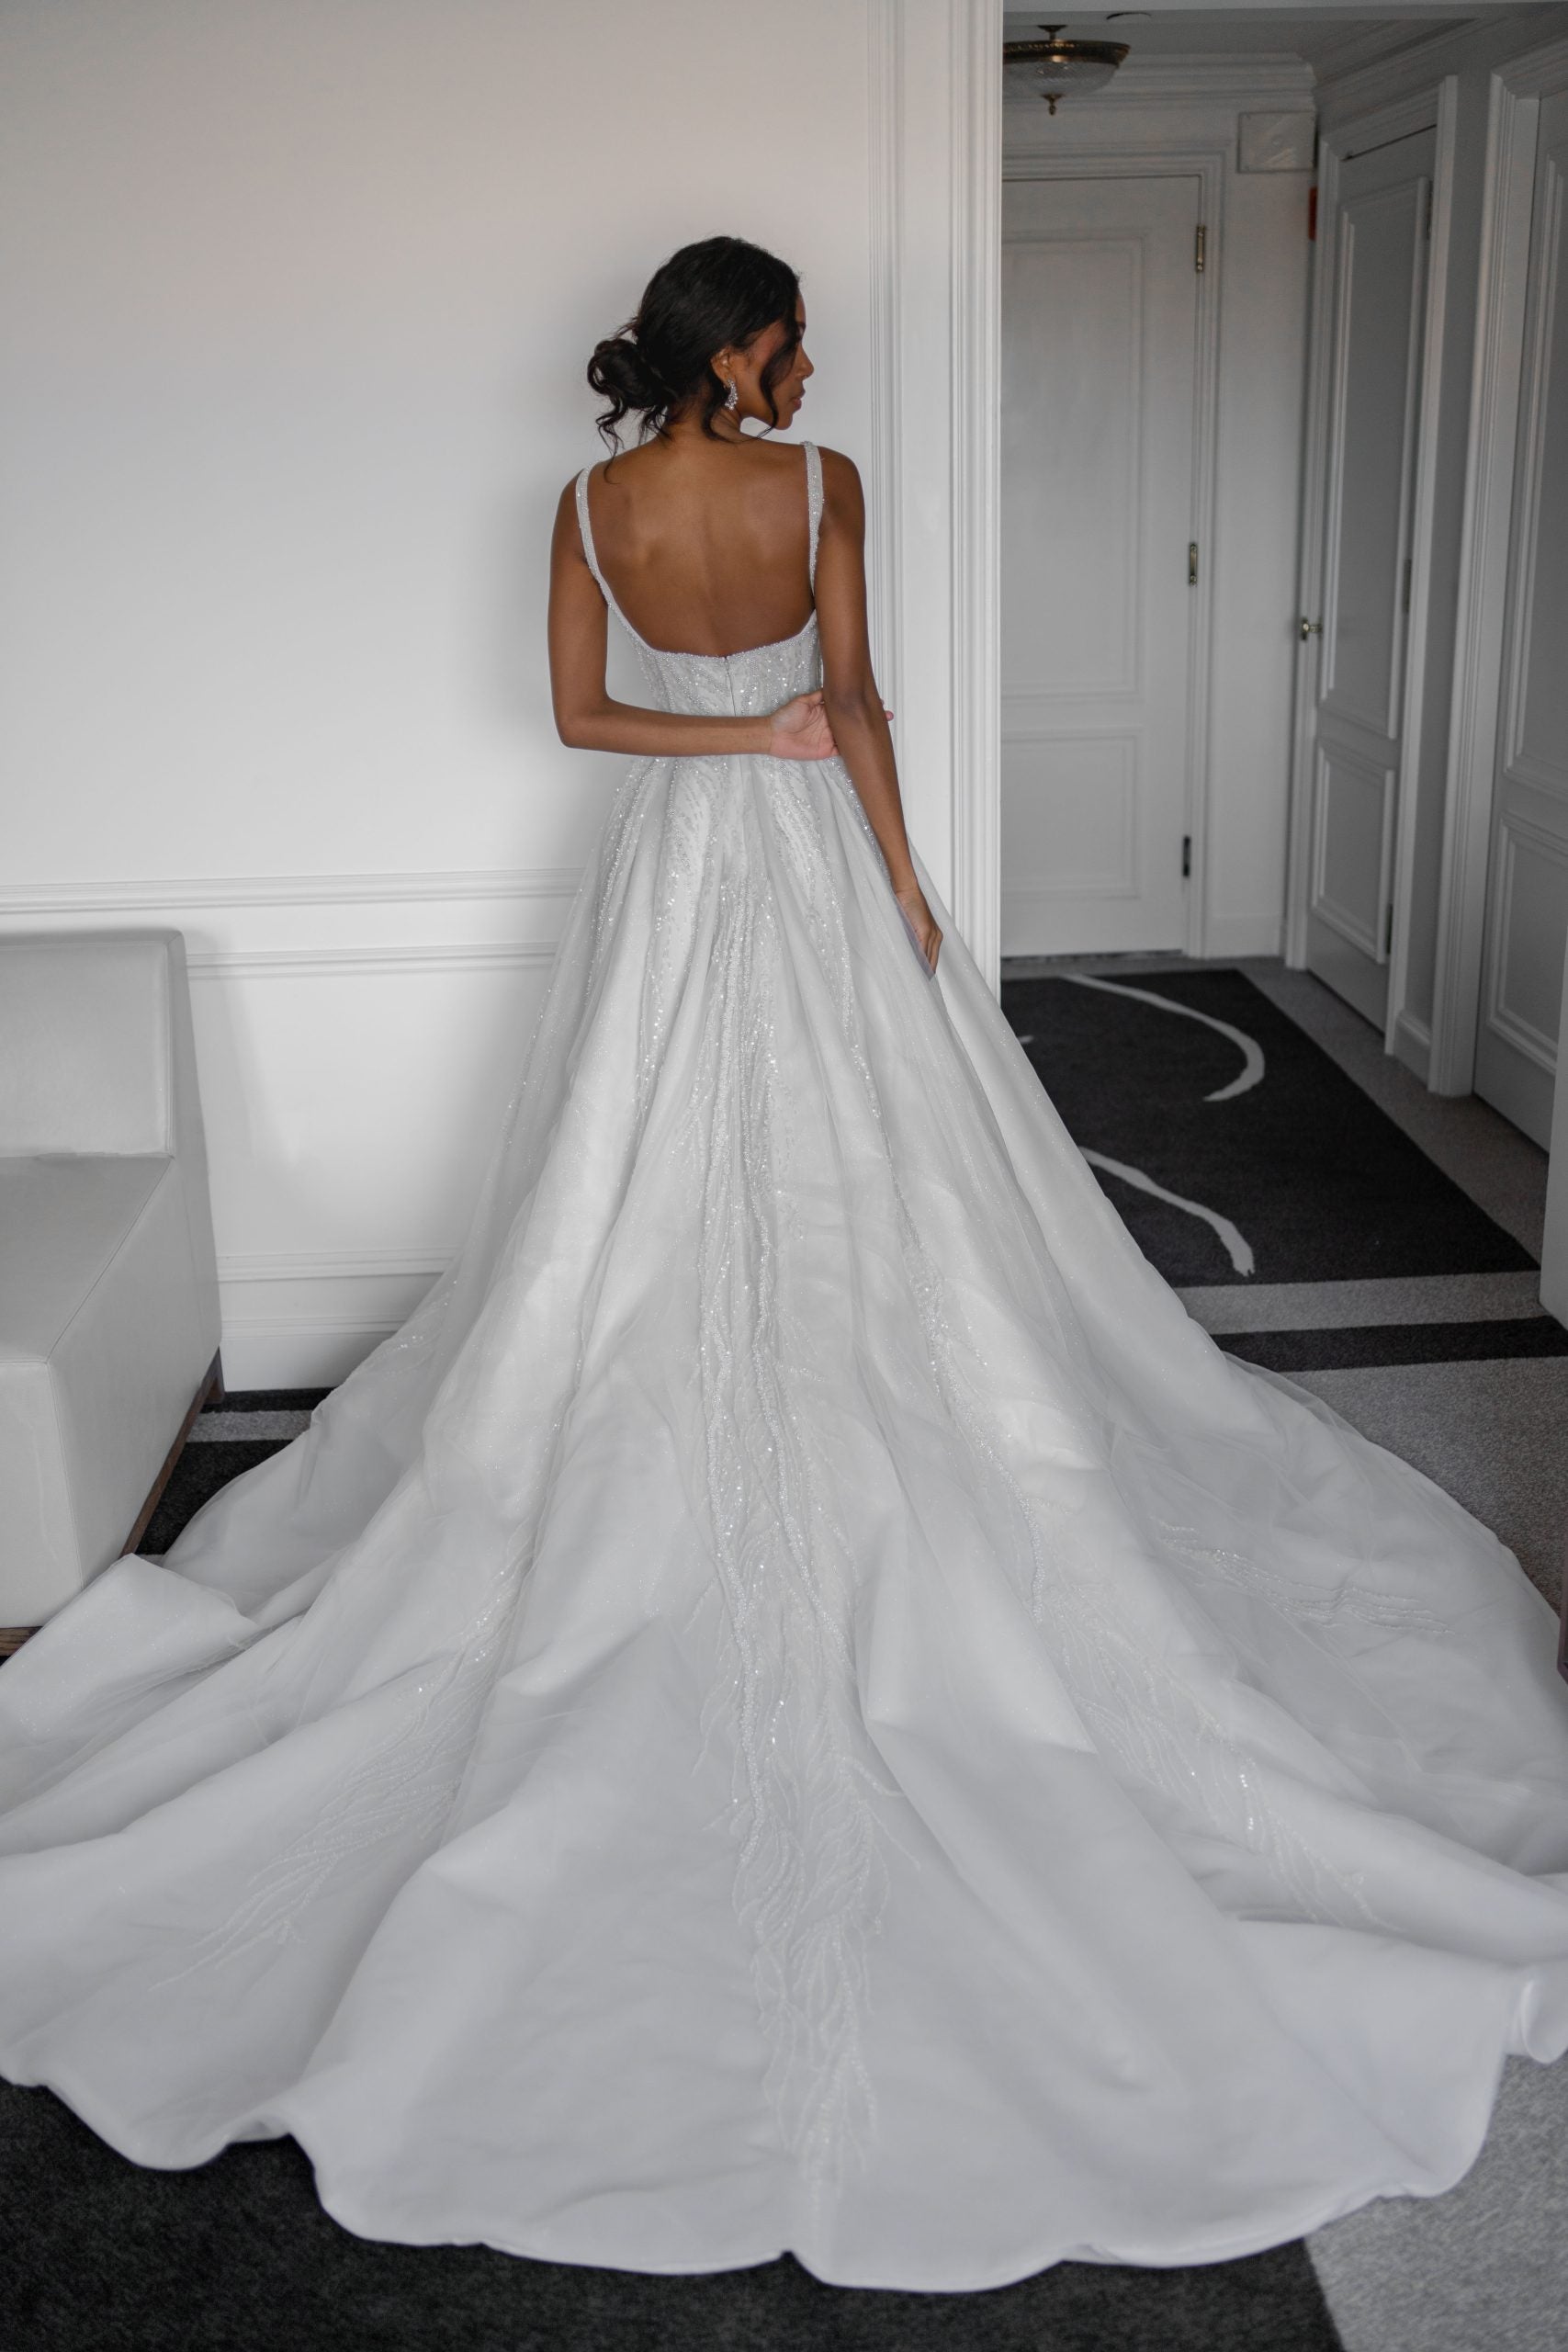 Chic And Dramatic Square-Neck Beaded Ball Gown by Blanche Bridal - Image 3